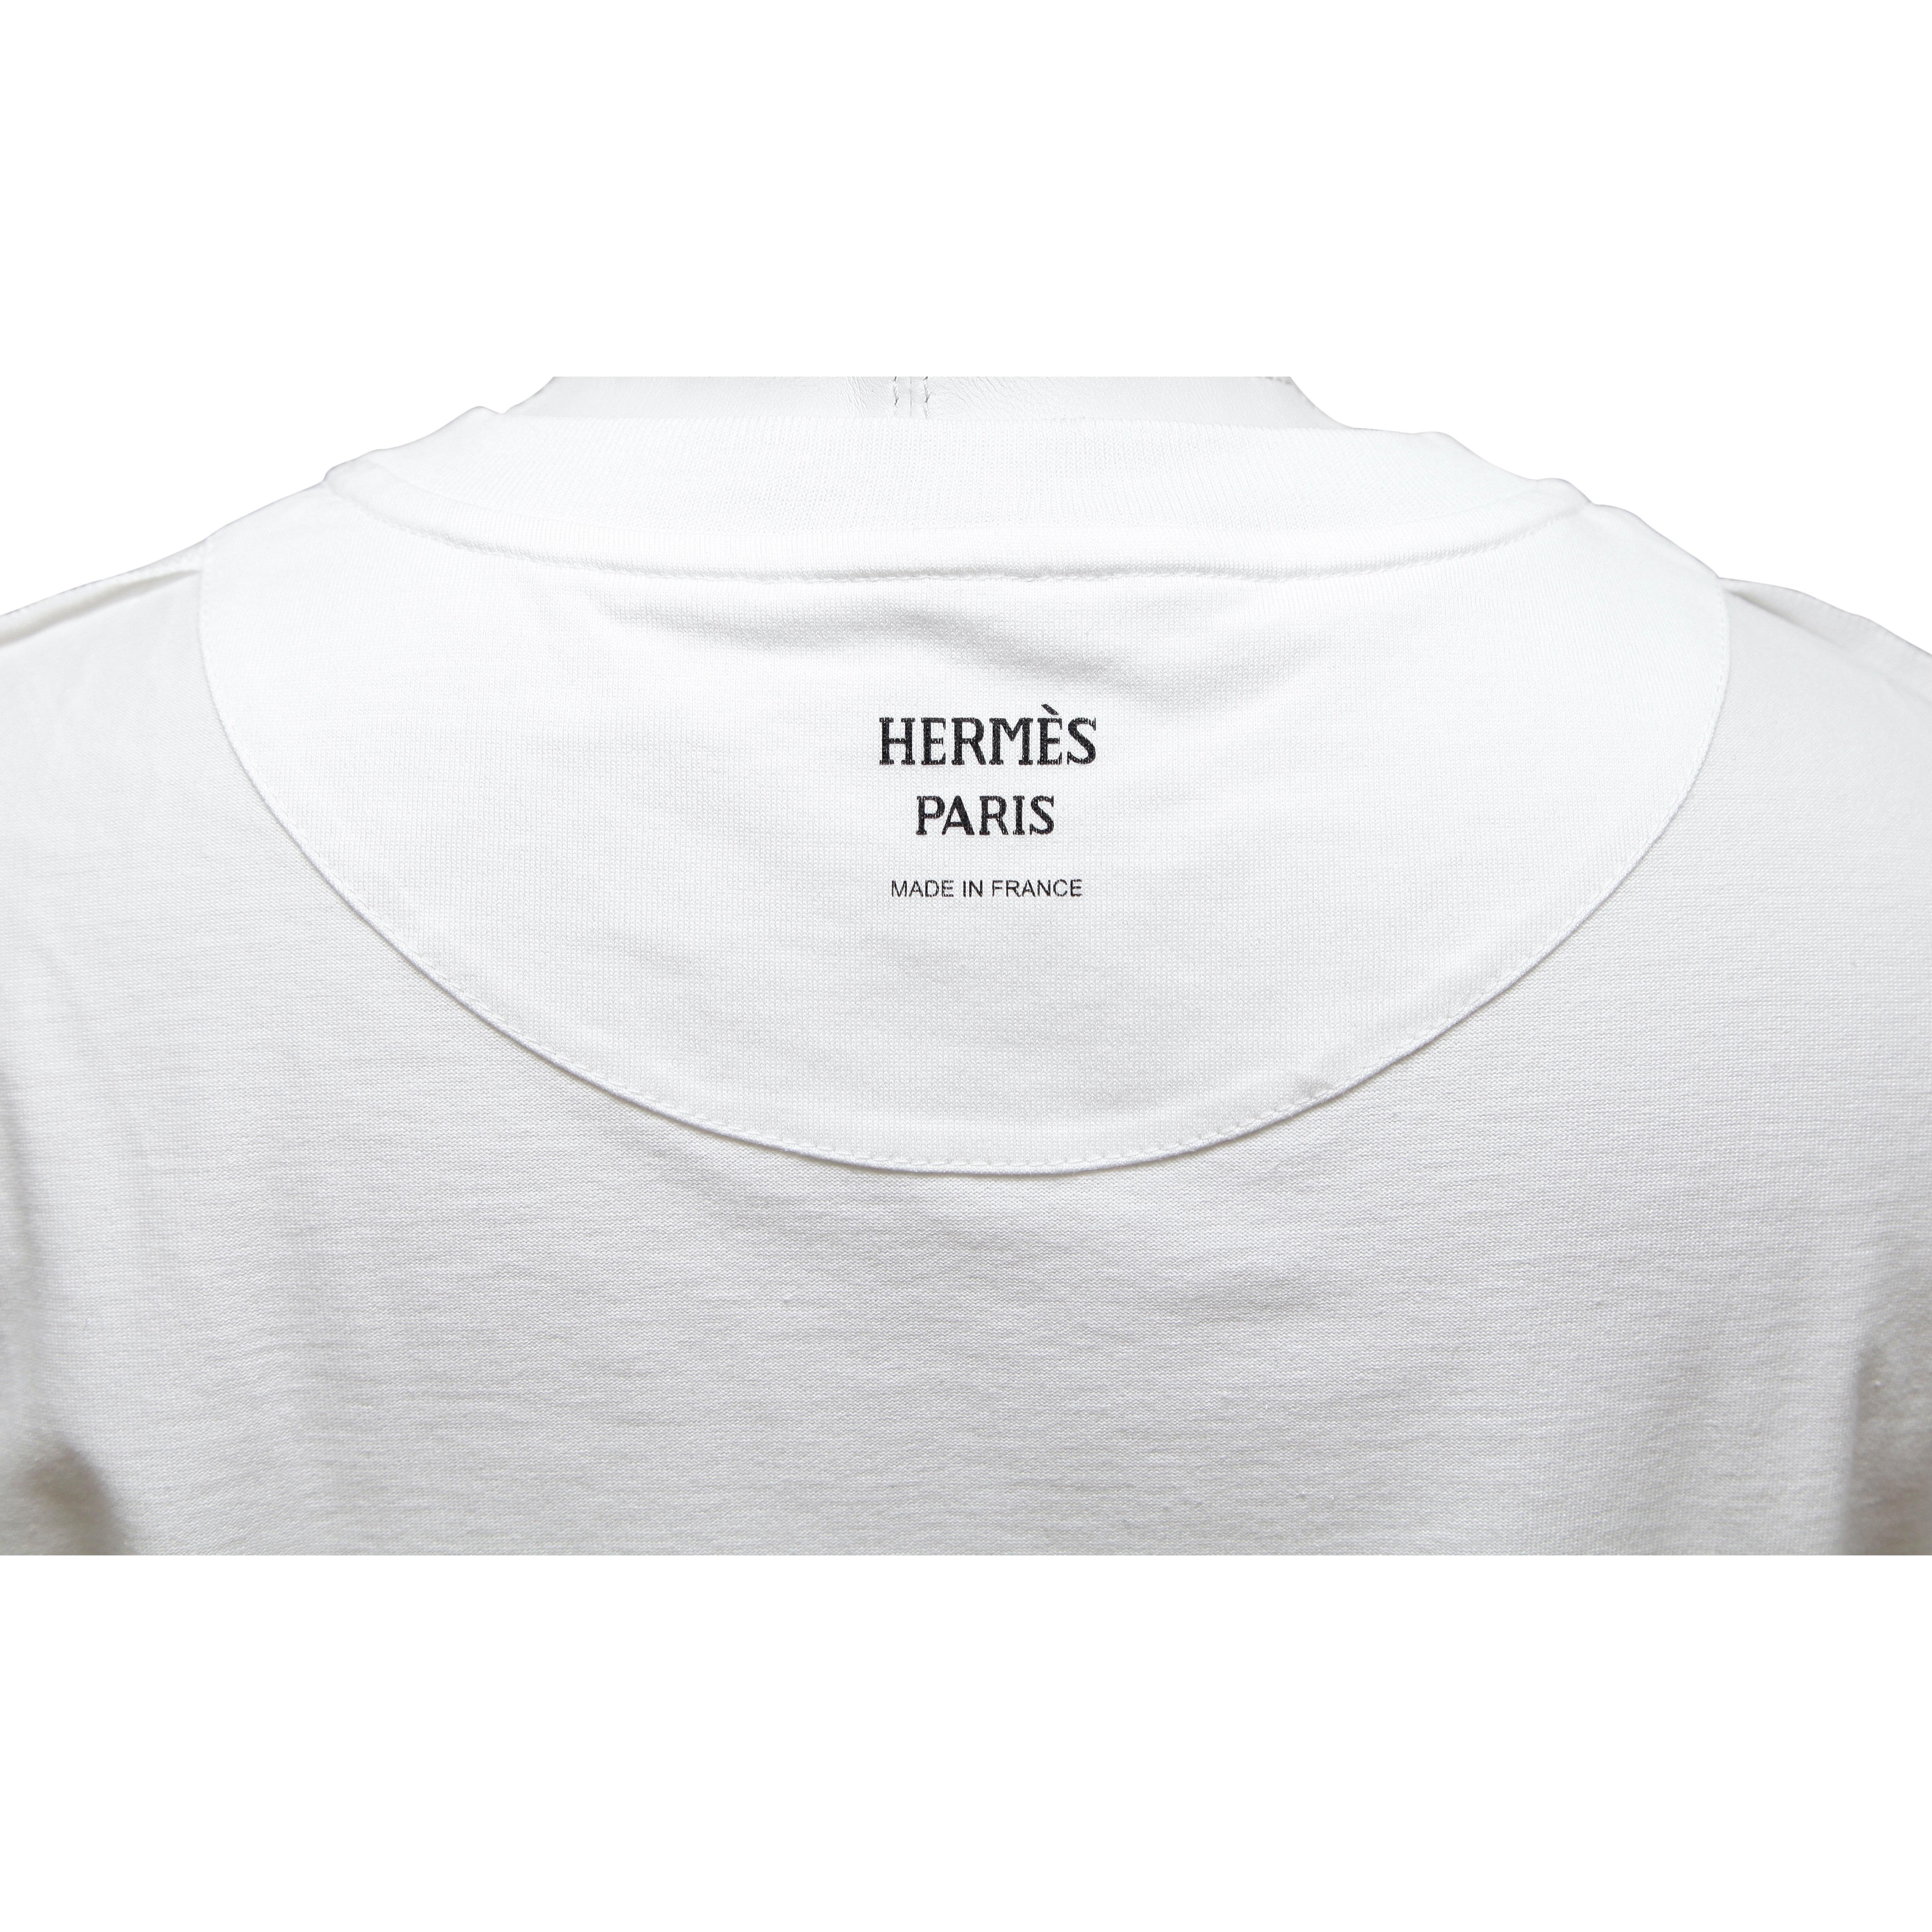 Women's HERMES White T-Shirt Top Mosaique Embroidery Pocket Short Sleeve Crew Neck 36